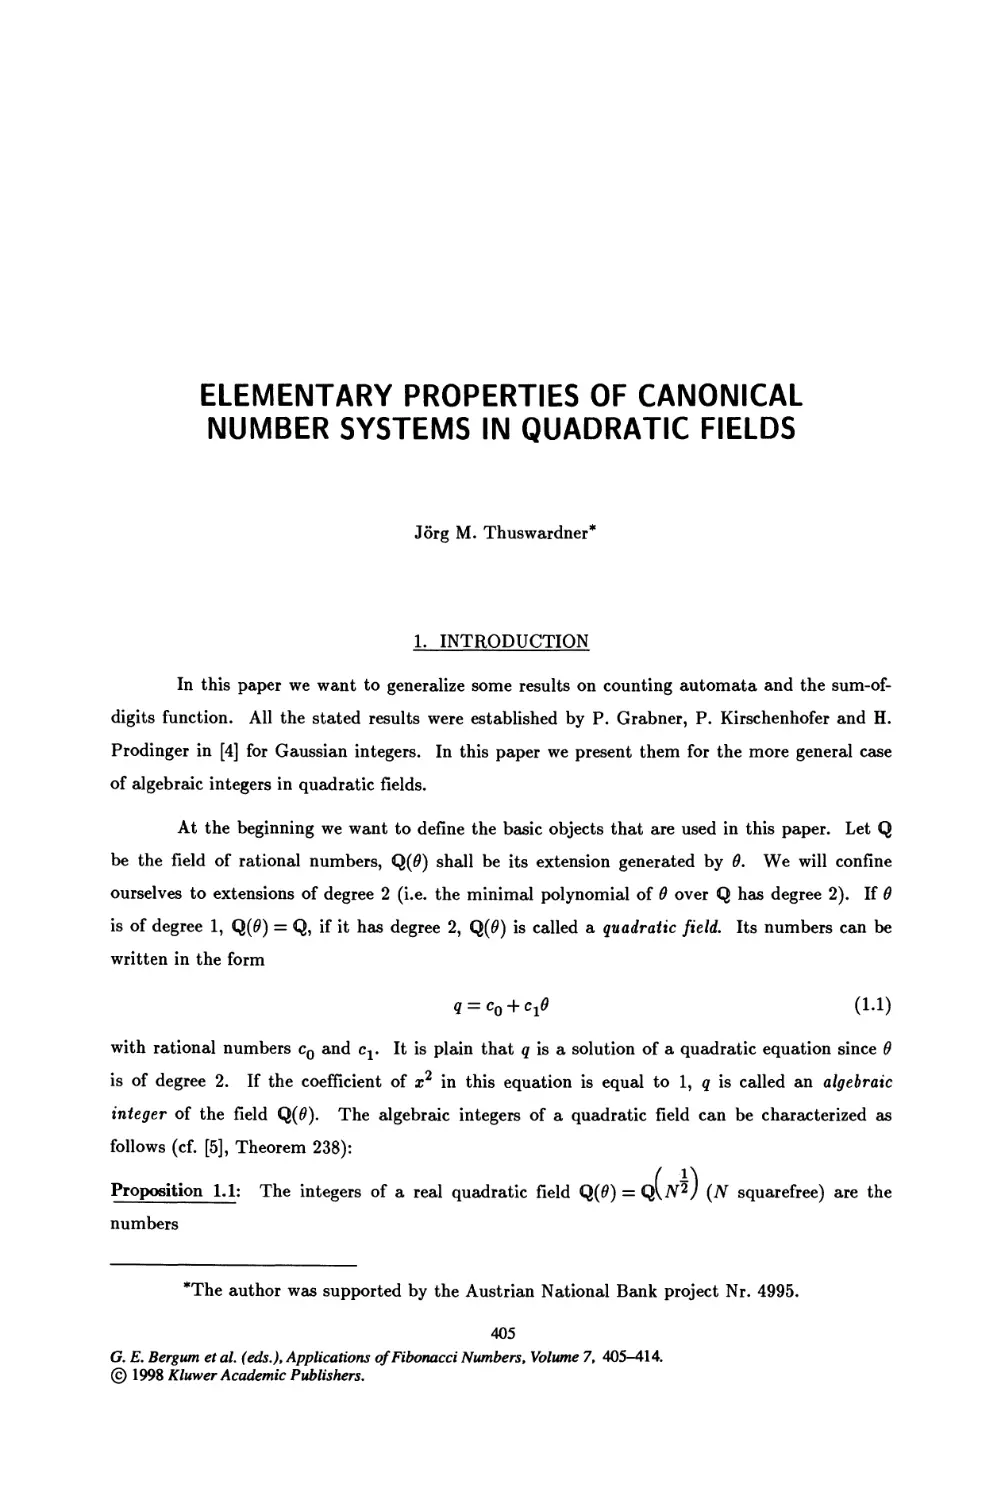 45. Elementary Properties of Canonical Number Systems in Quadratic Fields